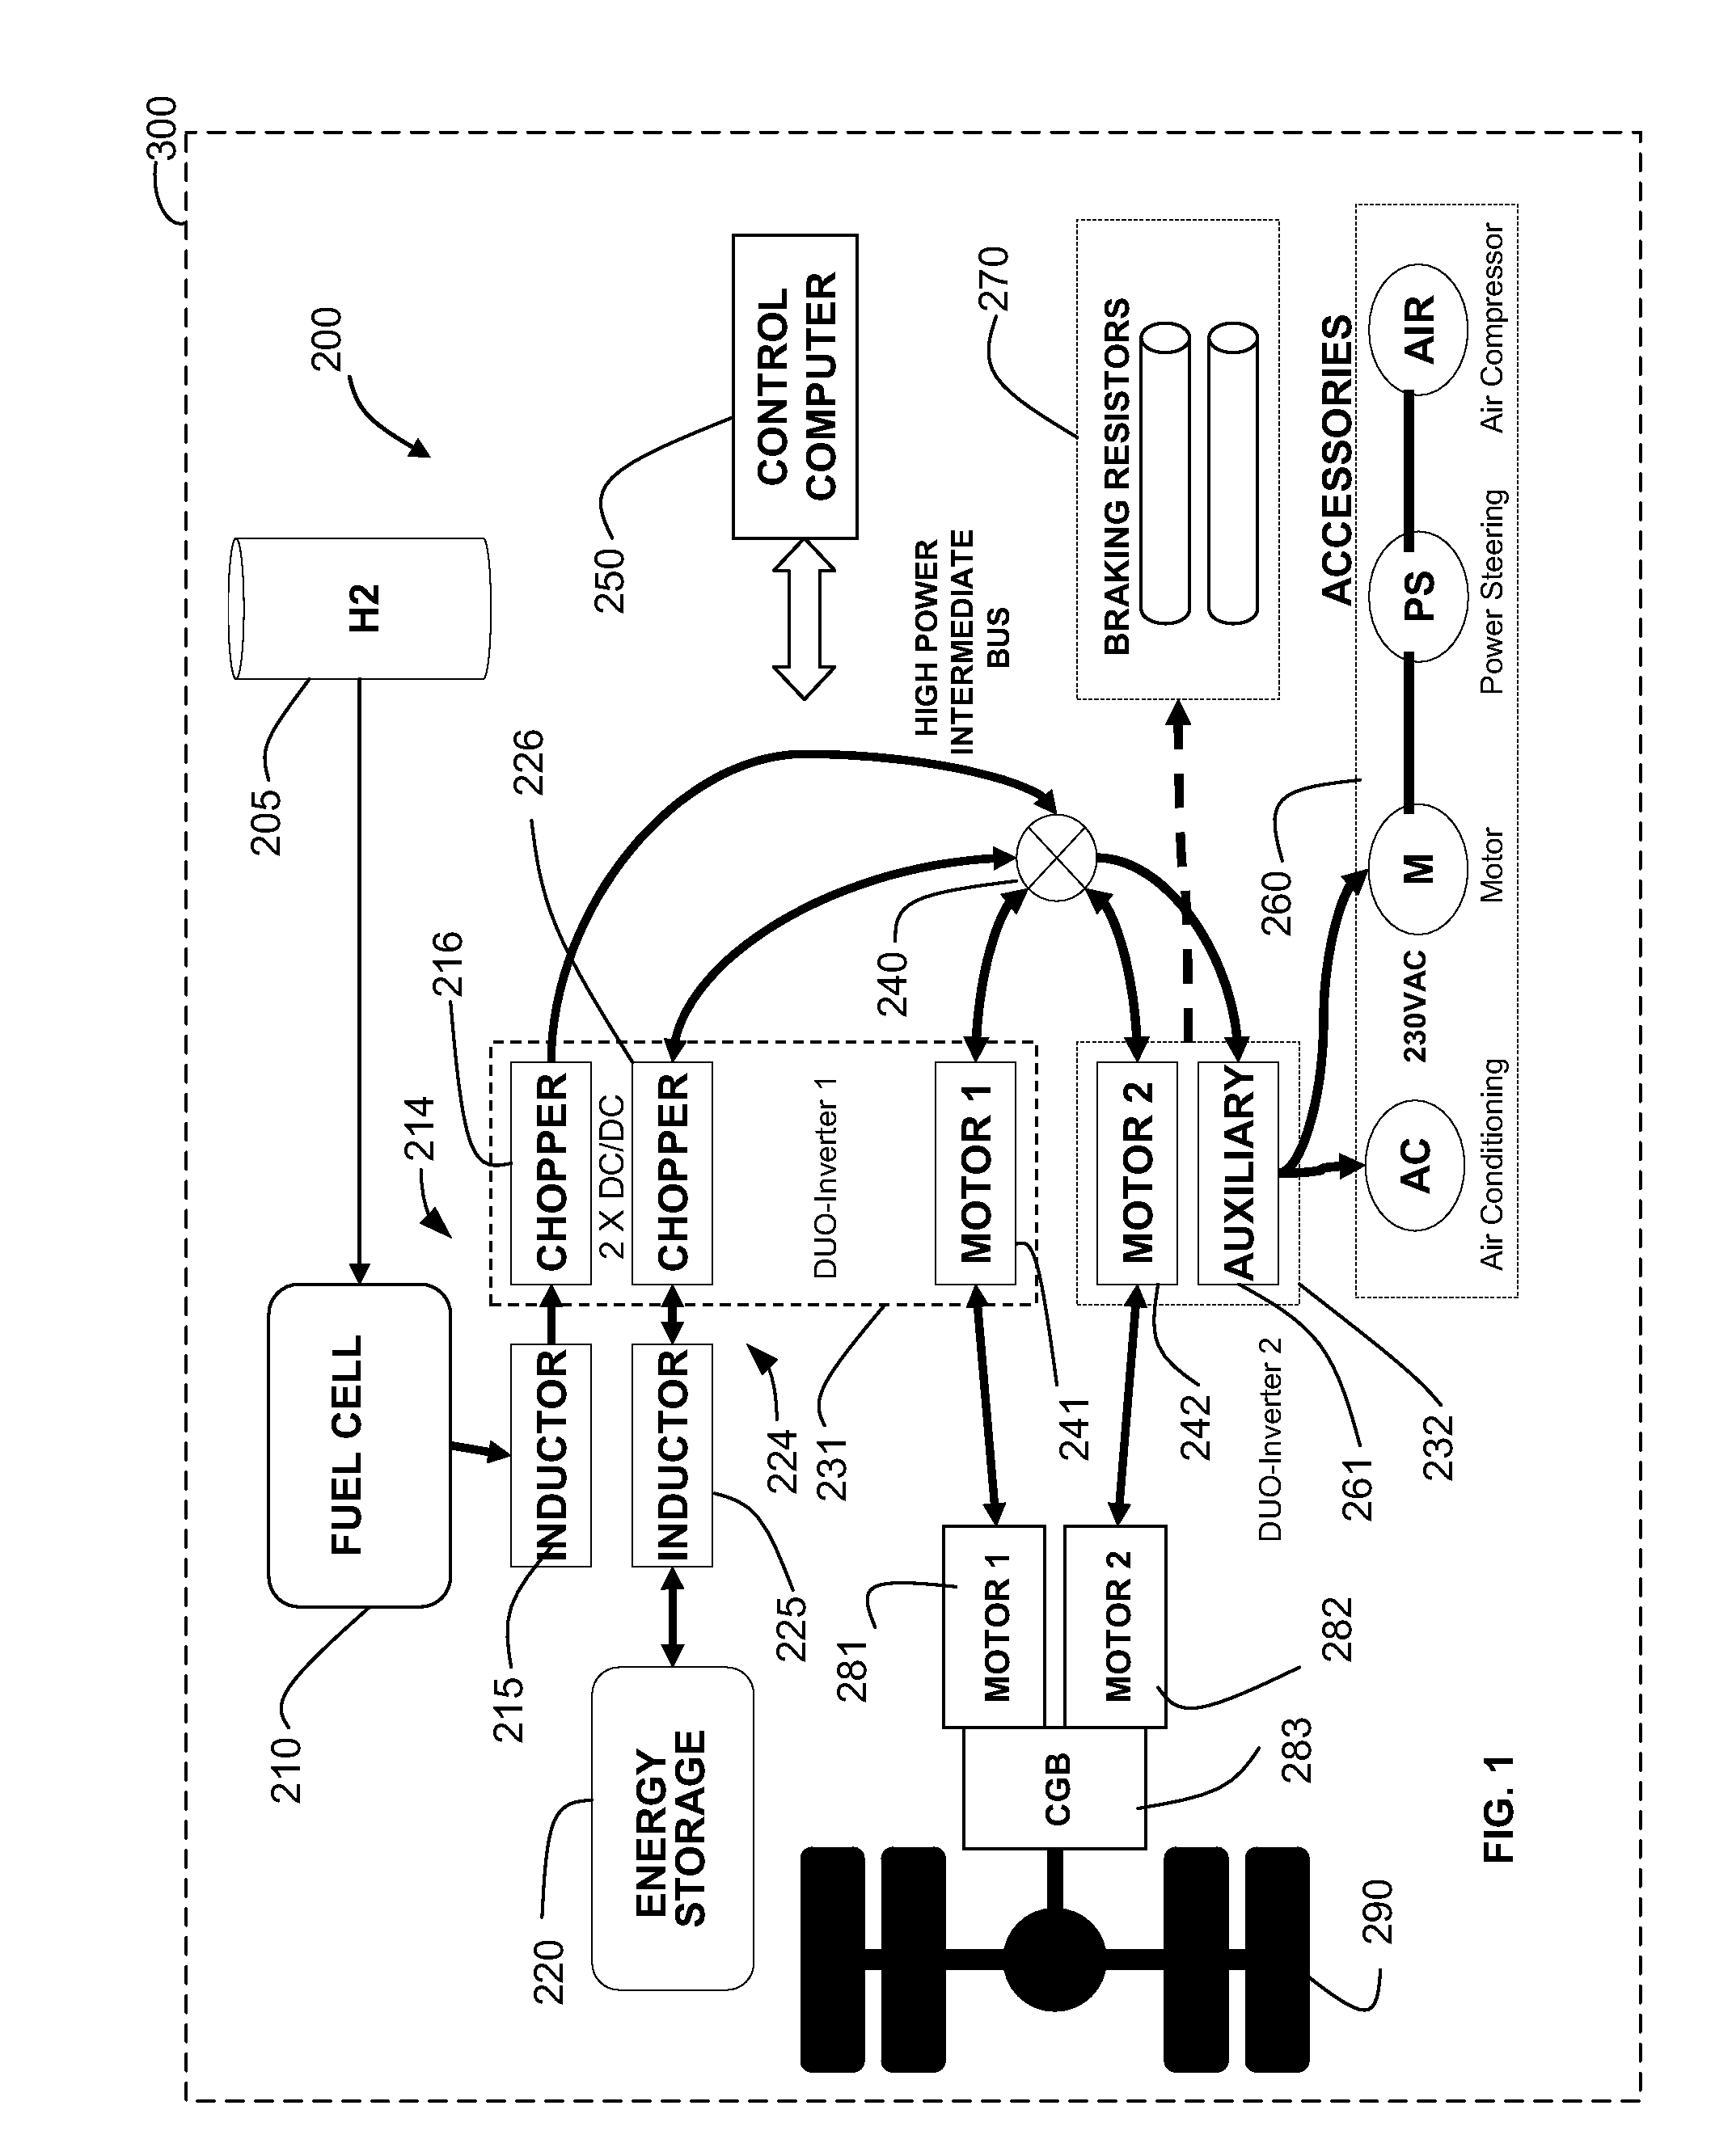 Fuel Cell Hybrid-Electric Heavy-Duty Vehicle Drive System and Method